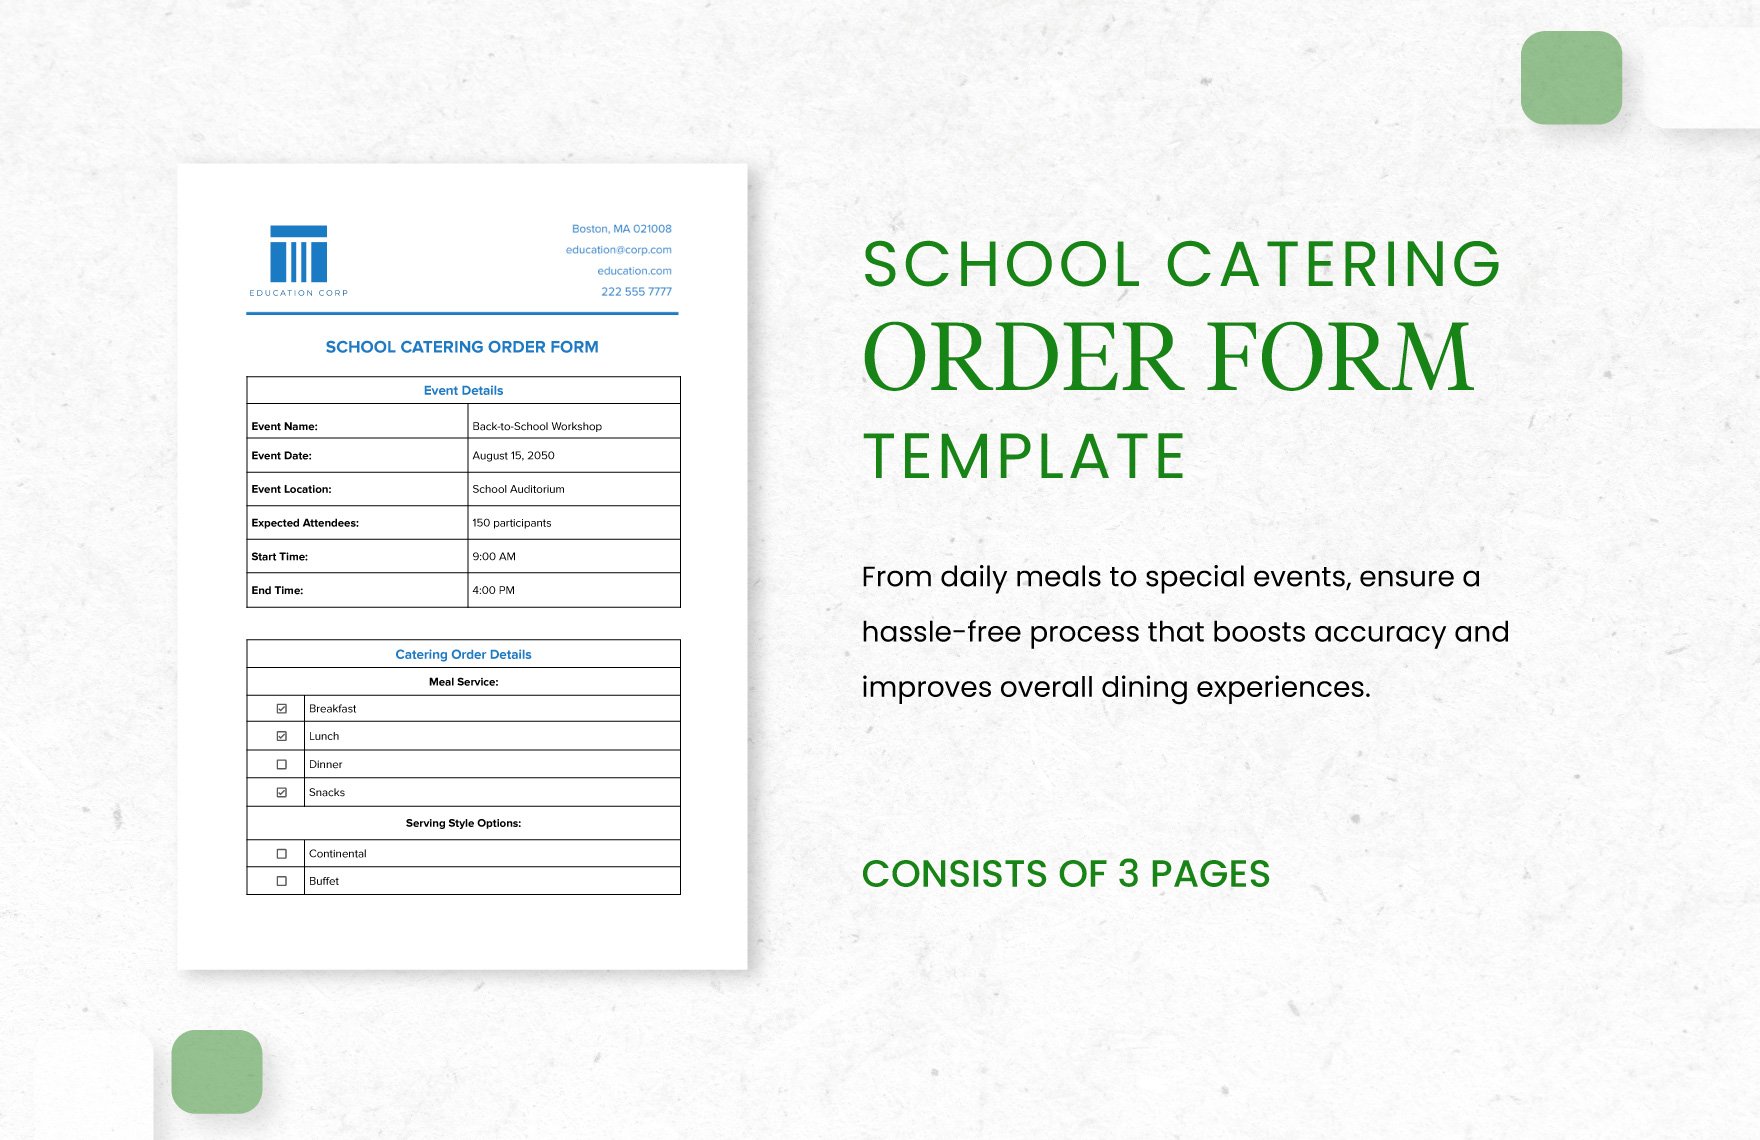 School Catering Order Form Template in Word, Google Docs, PDF